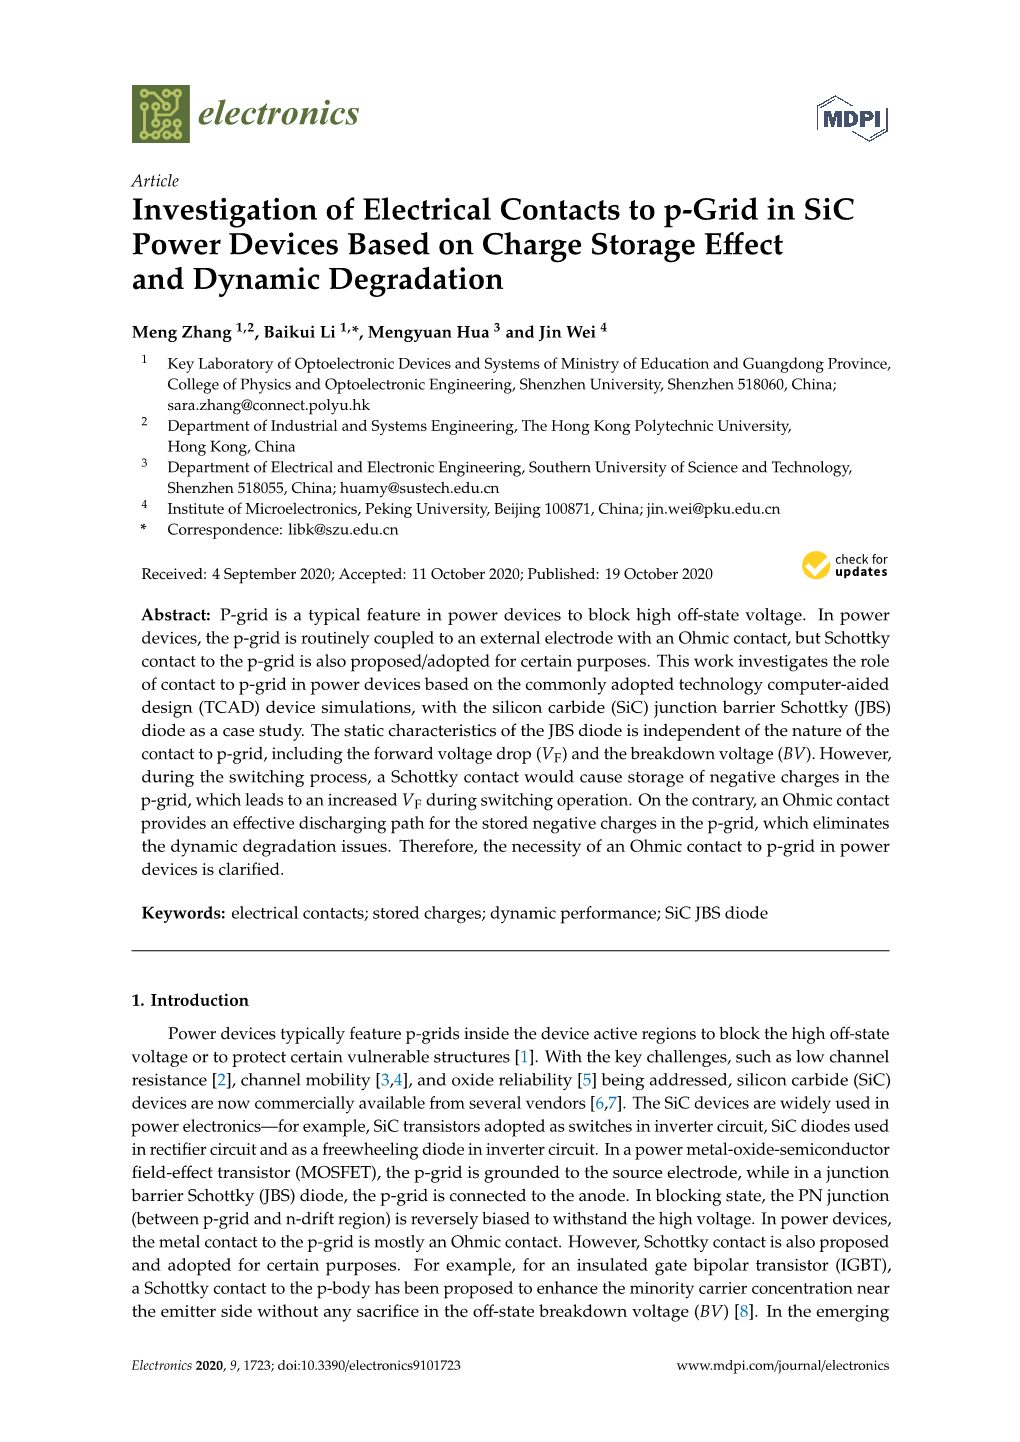 Investigation of Electrical Contacts to P-Grid in Sic Power Devices Based on Charge Storage Eﬀect and Dynamic Degradation